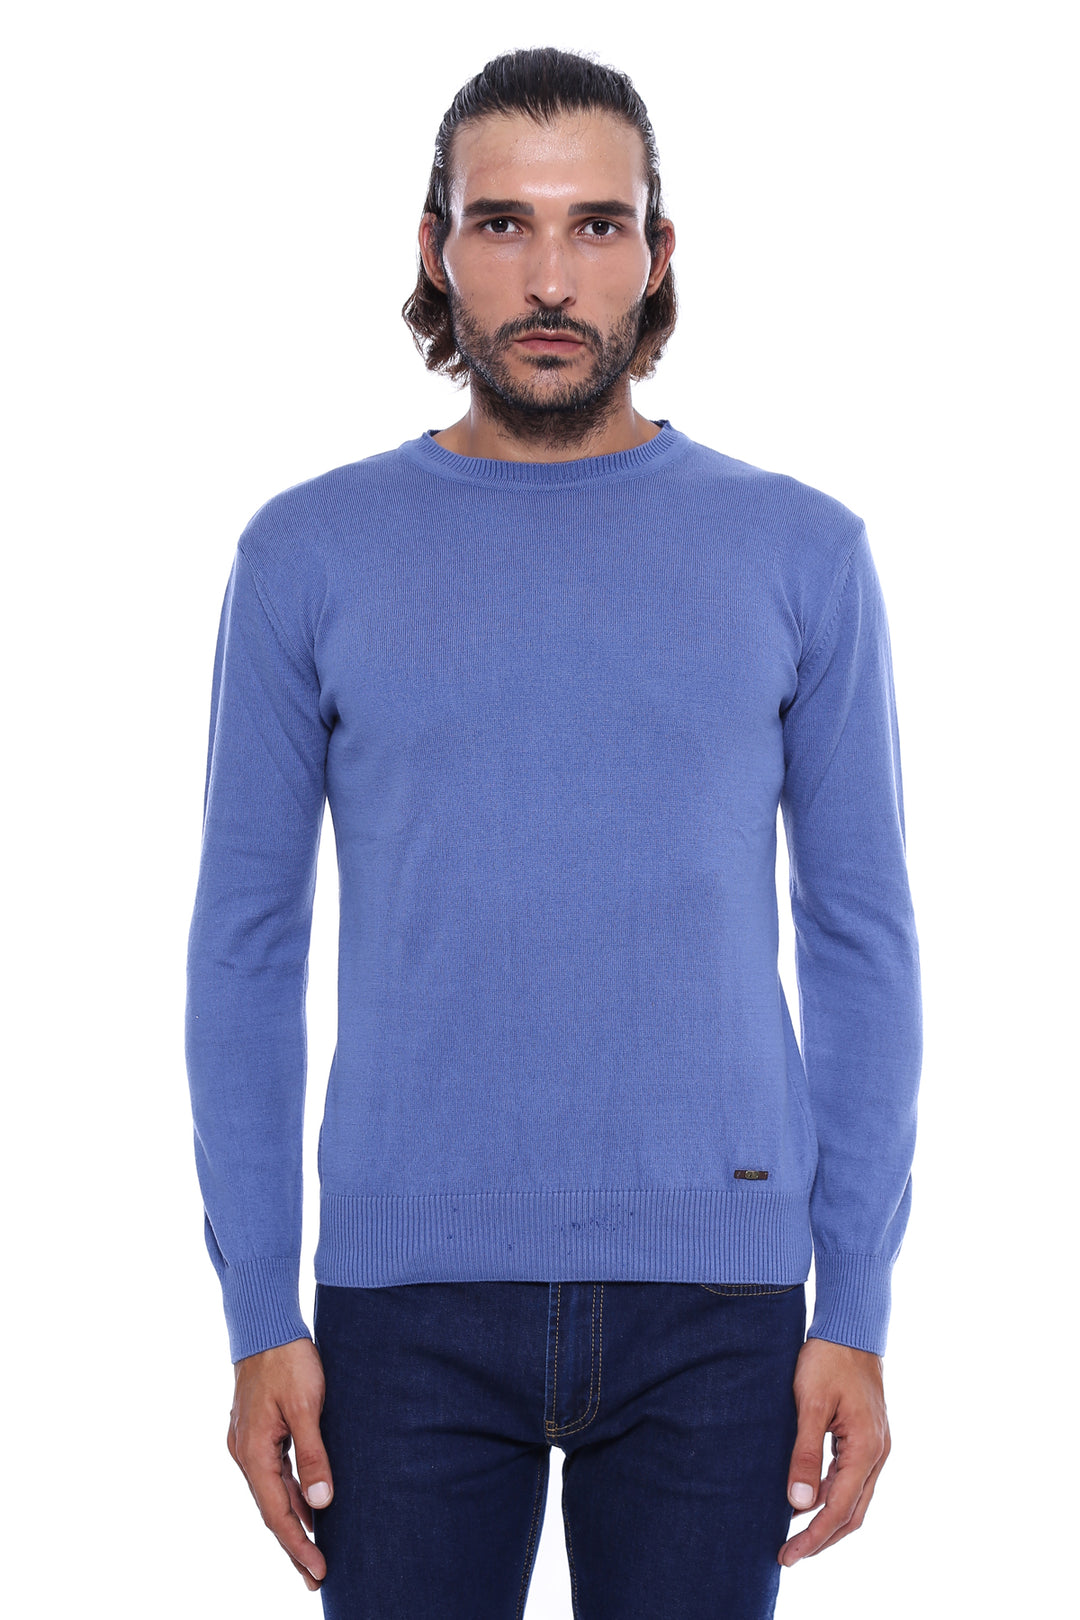 Circle Neck Blue Knitwear - Wessi